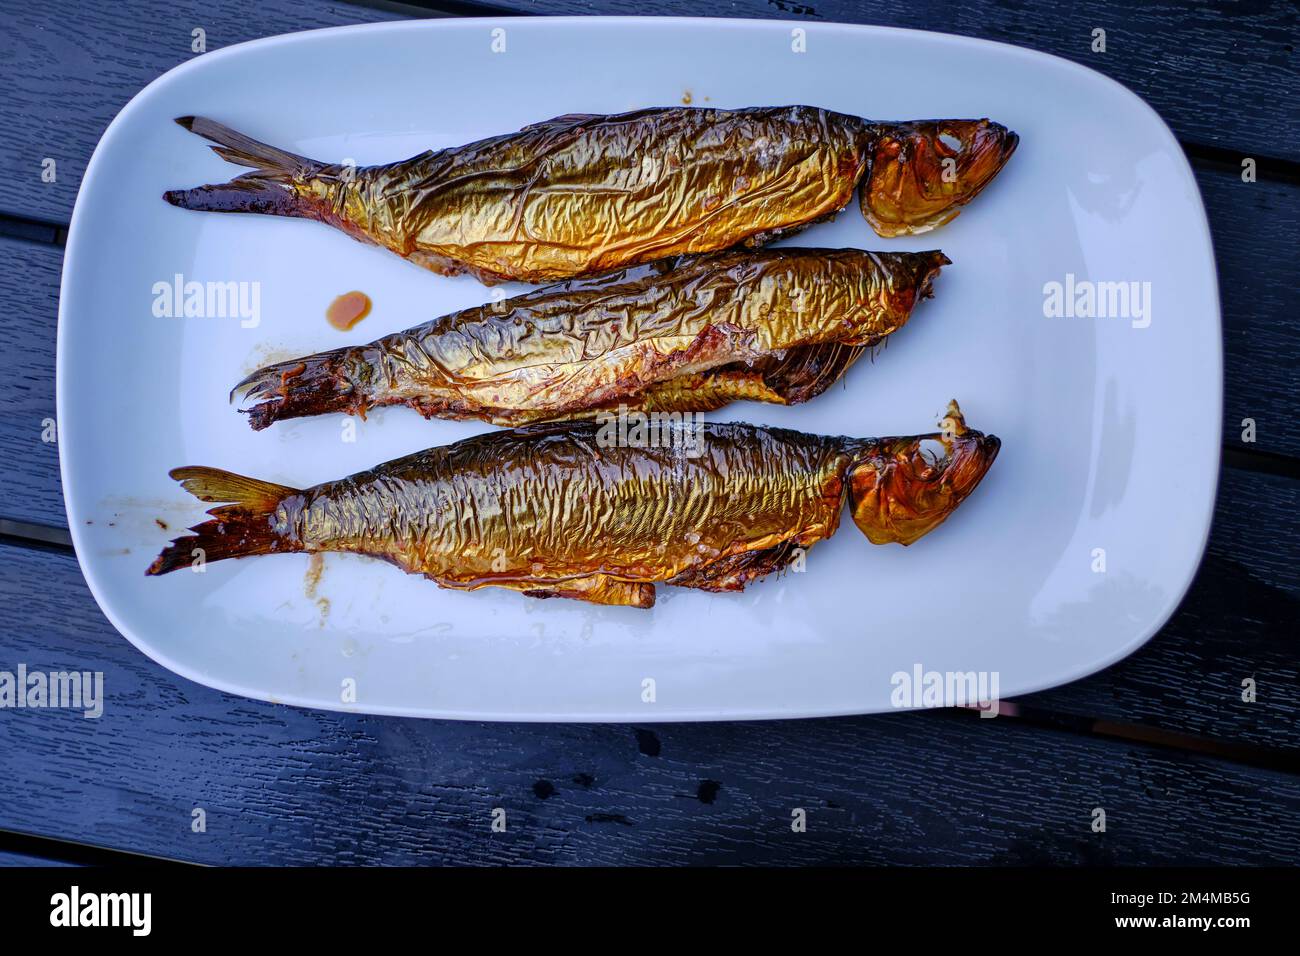 Three bucklings, freshly smoked herring, on a white serving platter, as so-called "golden Bornholmers" a specialty on the island of Bornholm, Denmark. Stock Photo